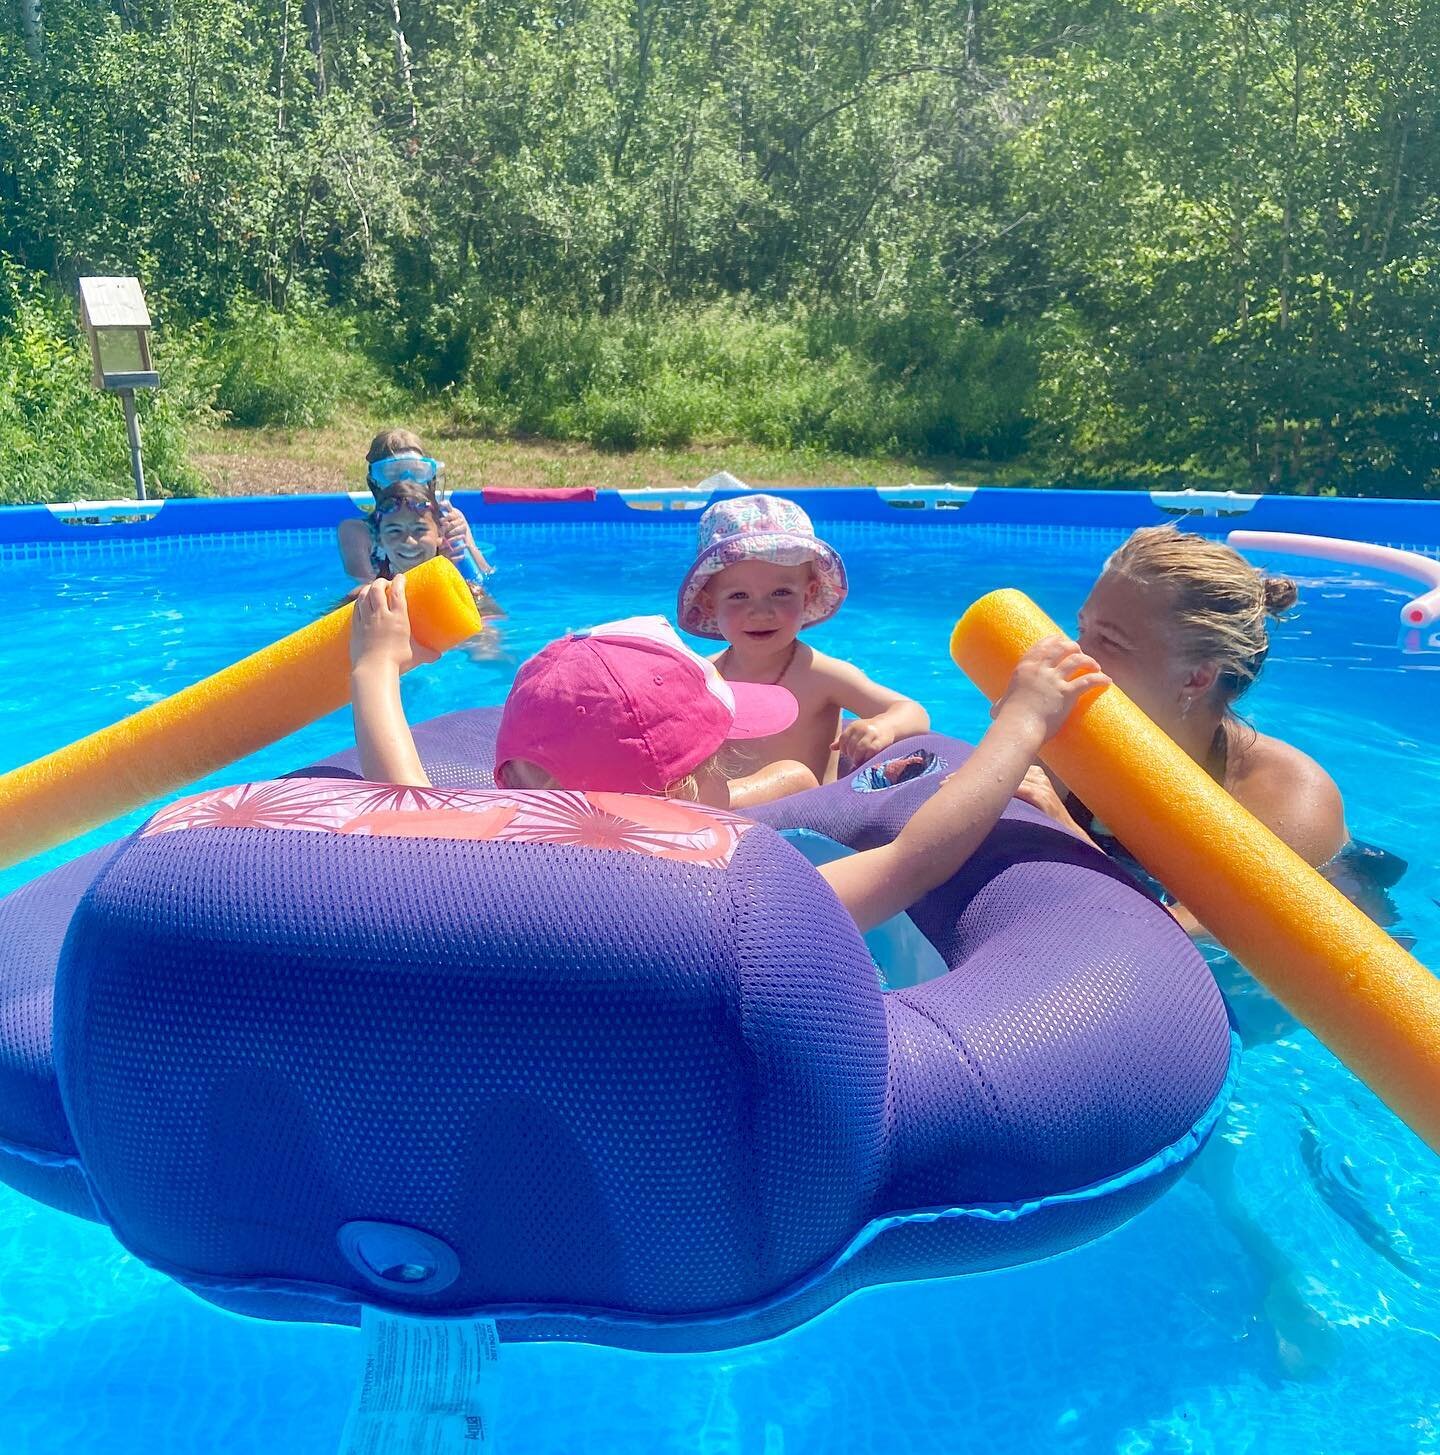 Summer is the BEST ☀️ Seriously considering one of these giant pools (if we could ever find one 😂) 
&bull;
&bull;
&bull;
&bull; #summer #pool #pooldays #floatie #outdoorpool #heatwave #backyard #cousins #happybaby #happy #sunshine